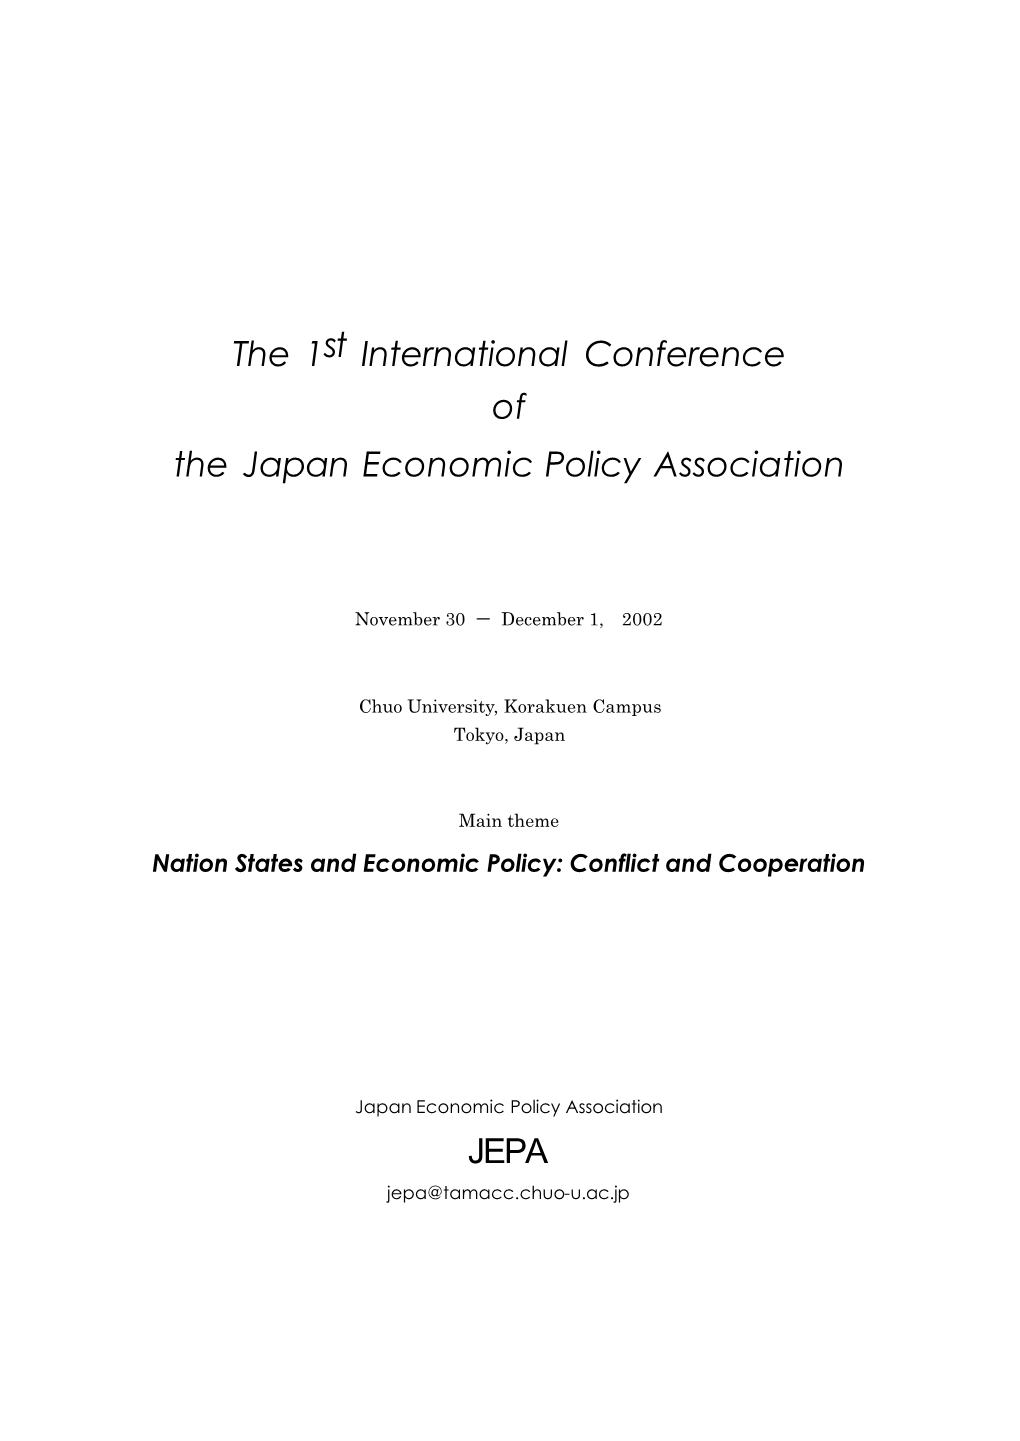 The 1St International Conference of the Japan Economic Policy Association